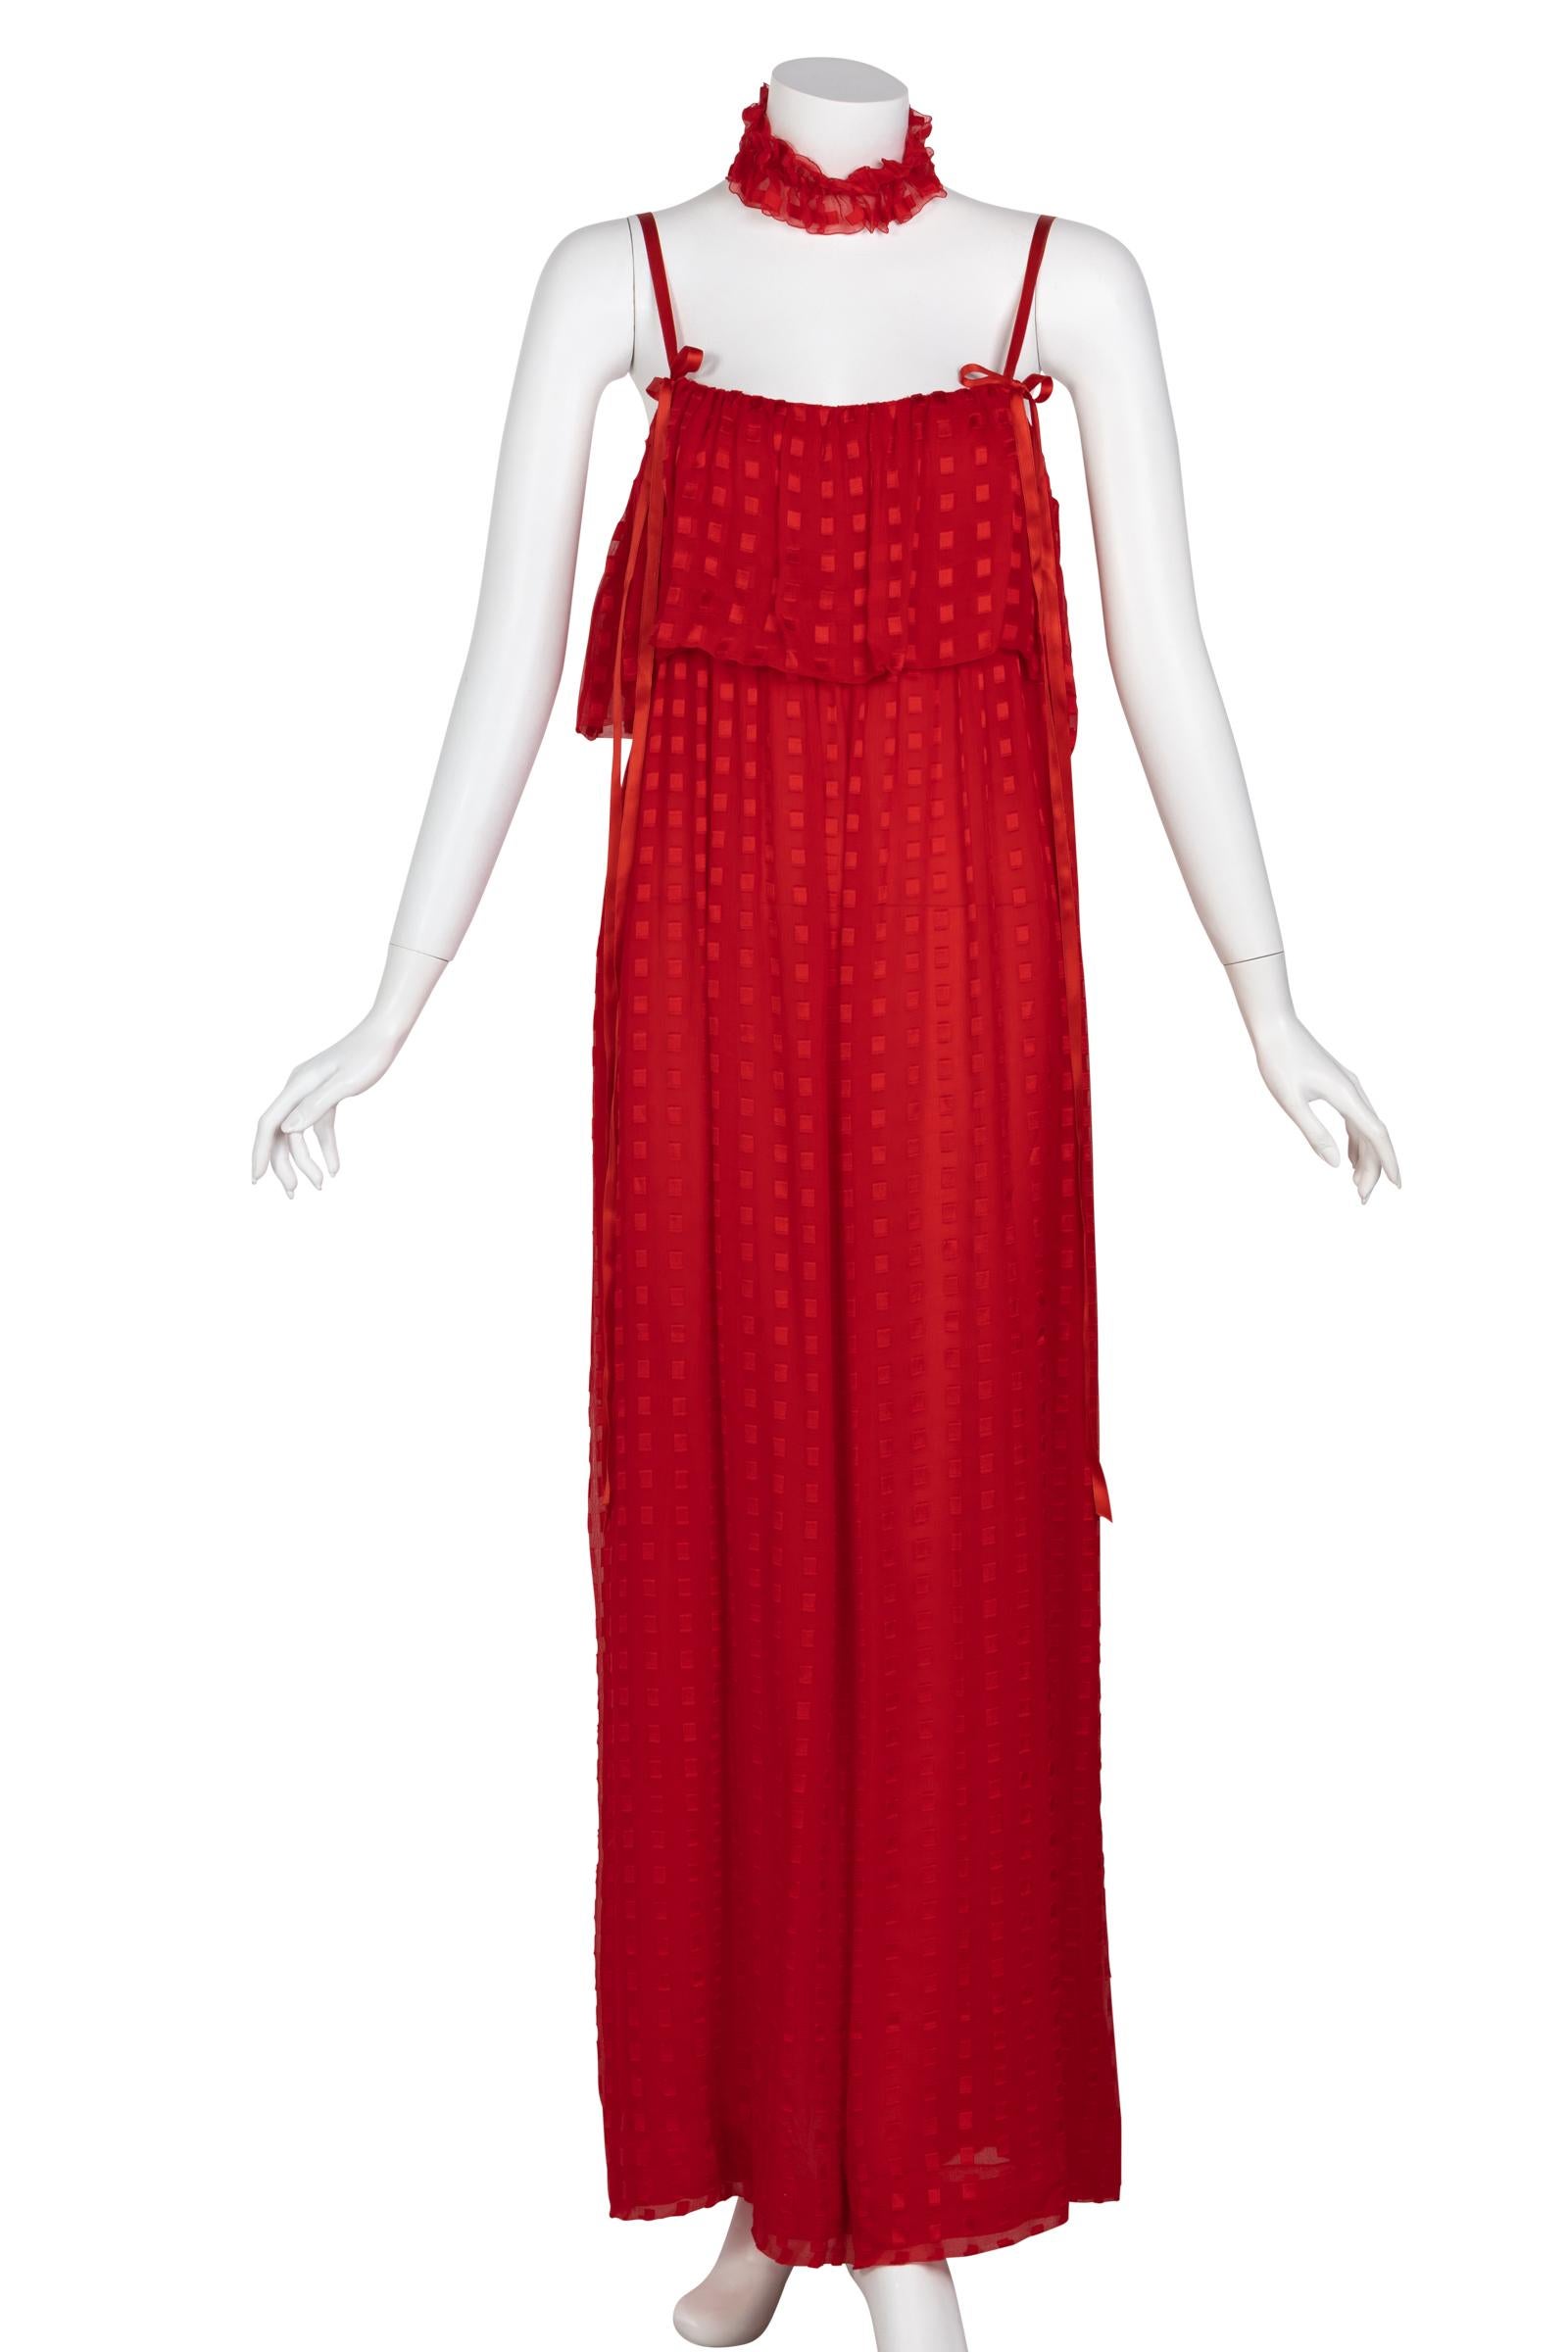 Women's Christian Dior Red Maxi Dress & Shawl Documented 1970s